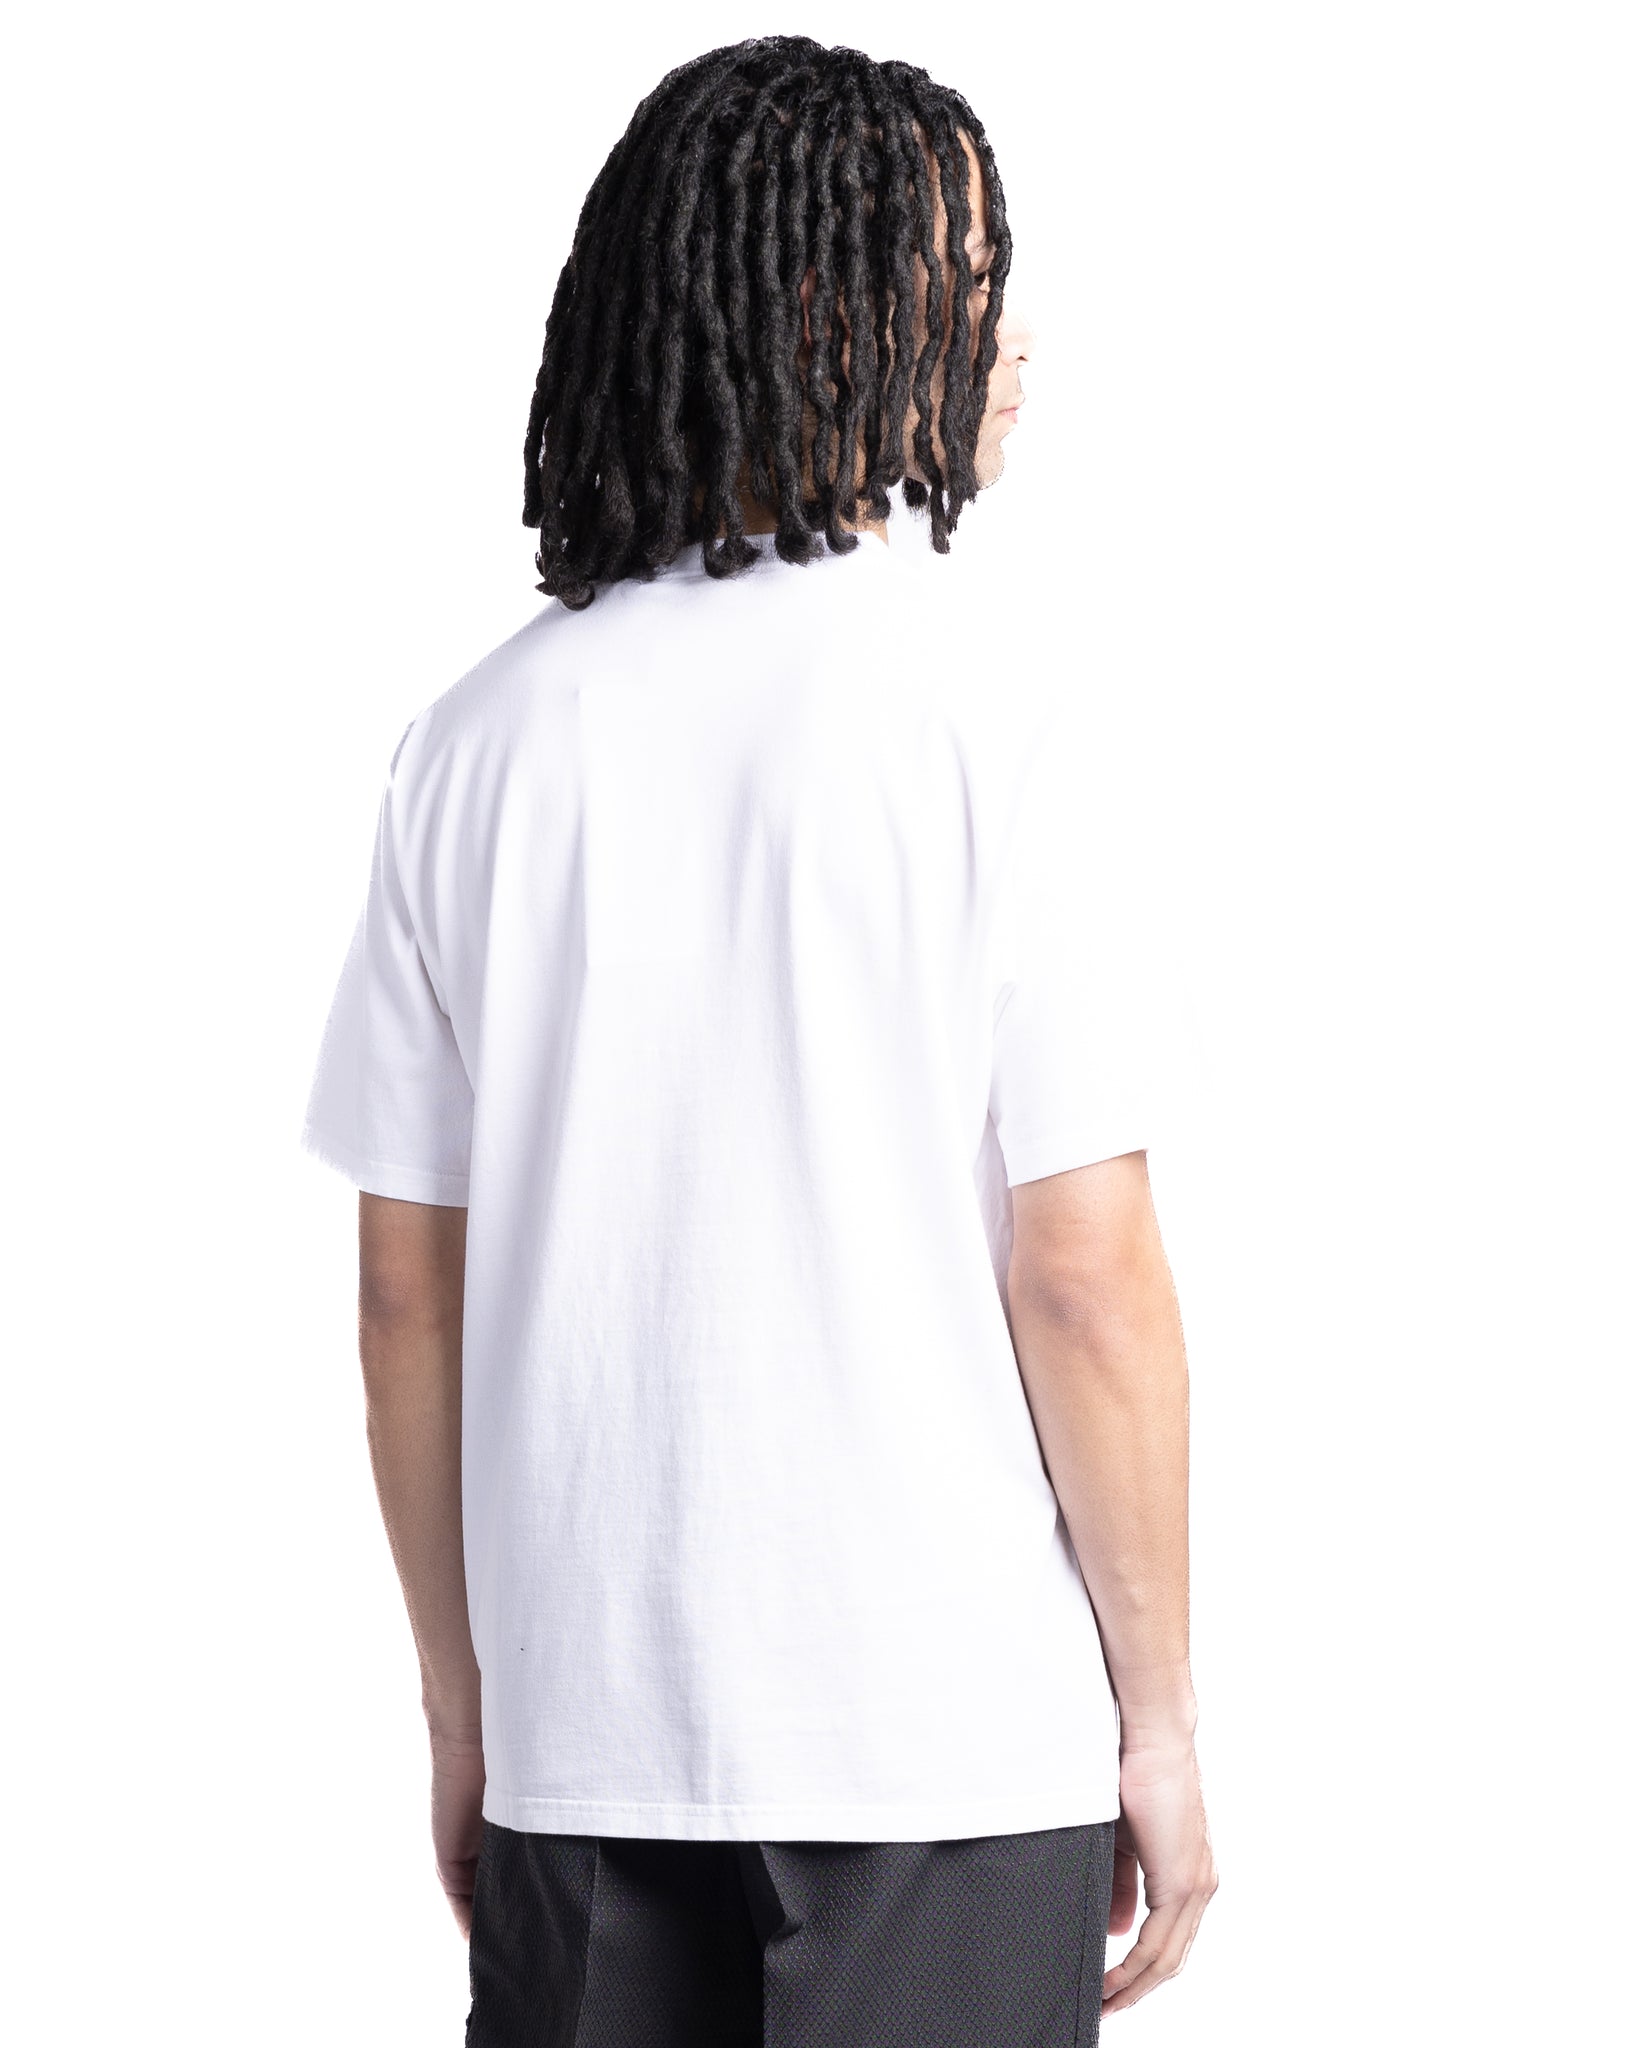 Undercover UC1C3802 Tuesday Tee White